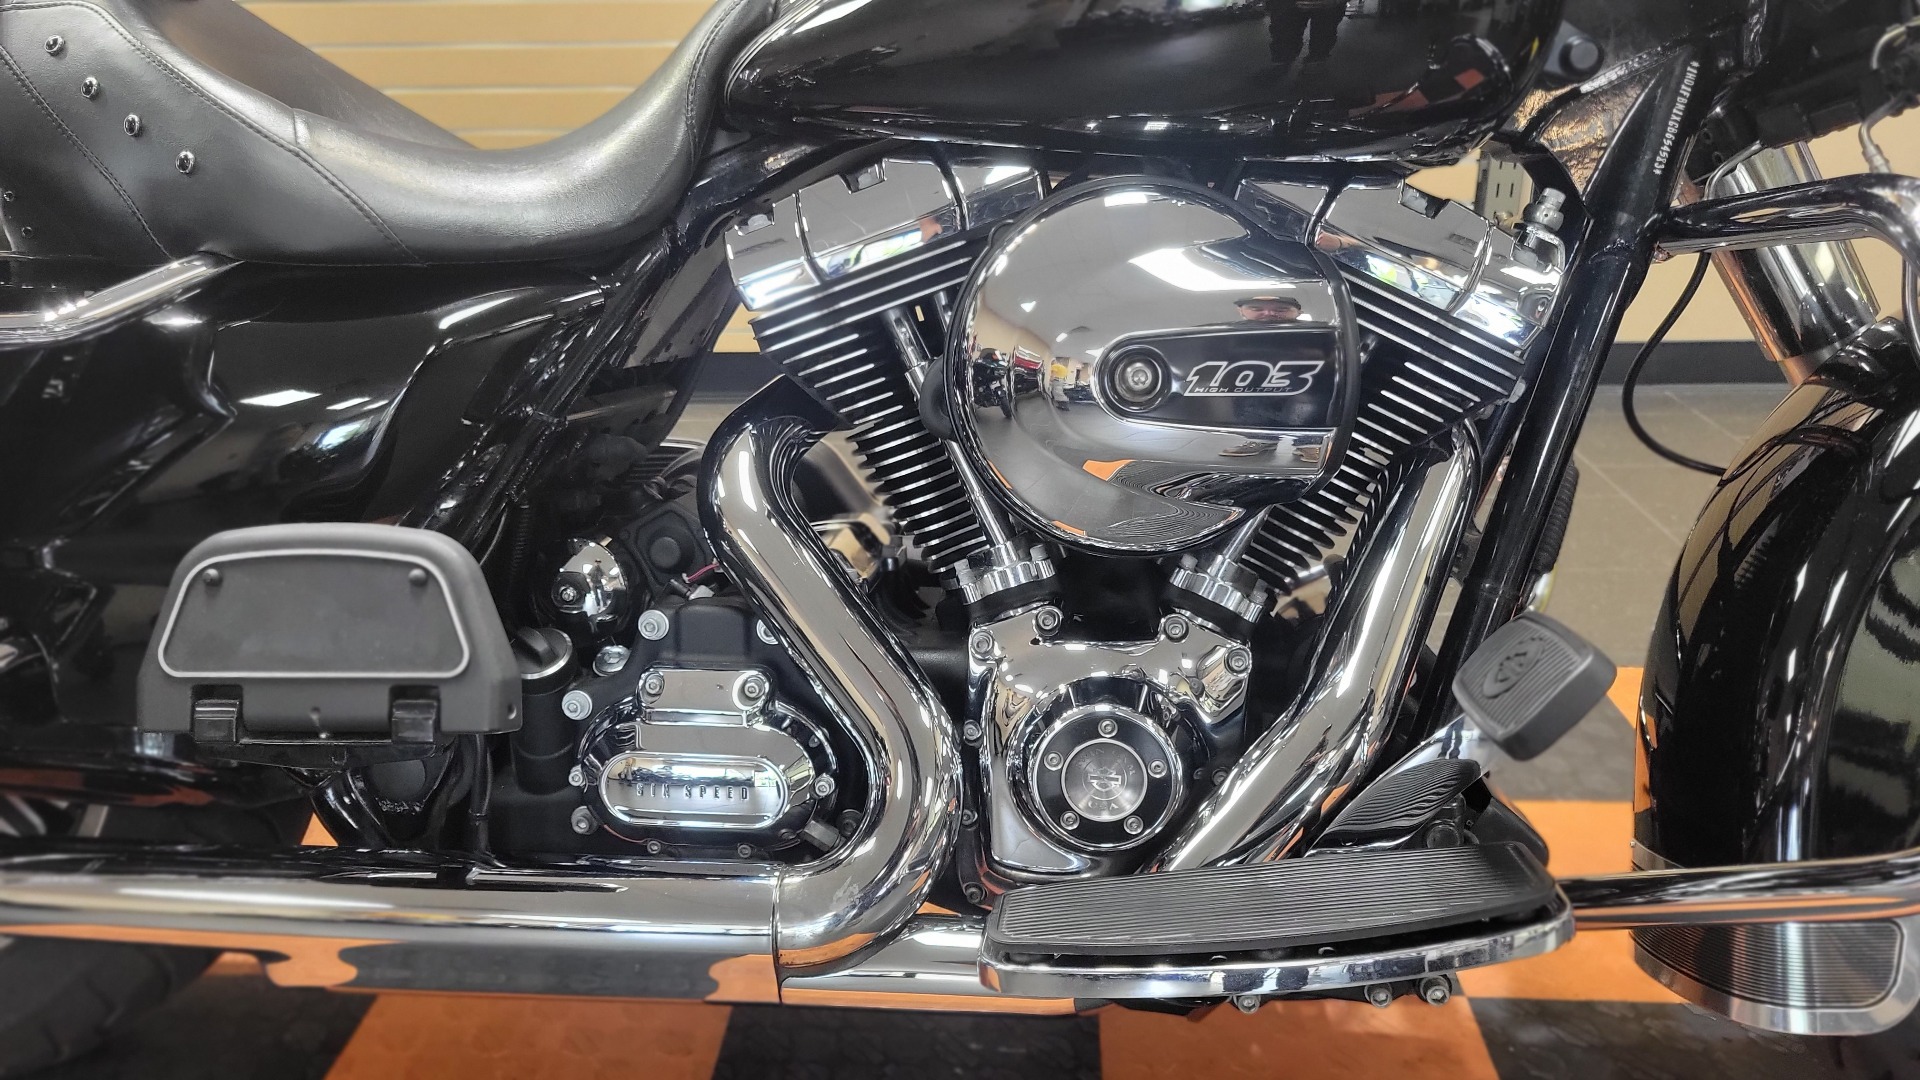 2020 Harley-Davidson Road King® in The Woodlands, Texas - Photo 8